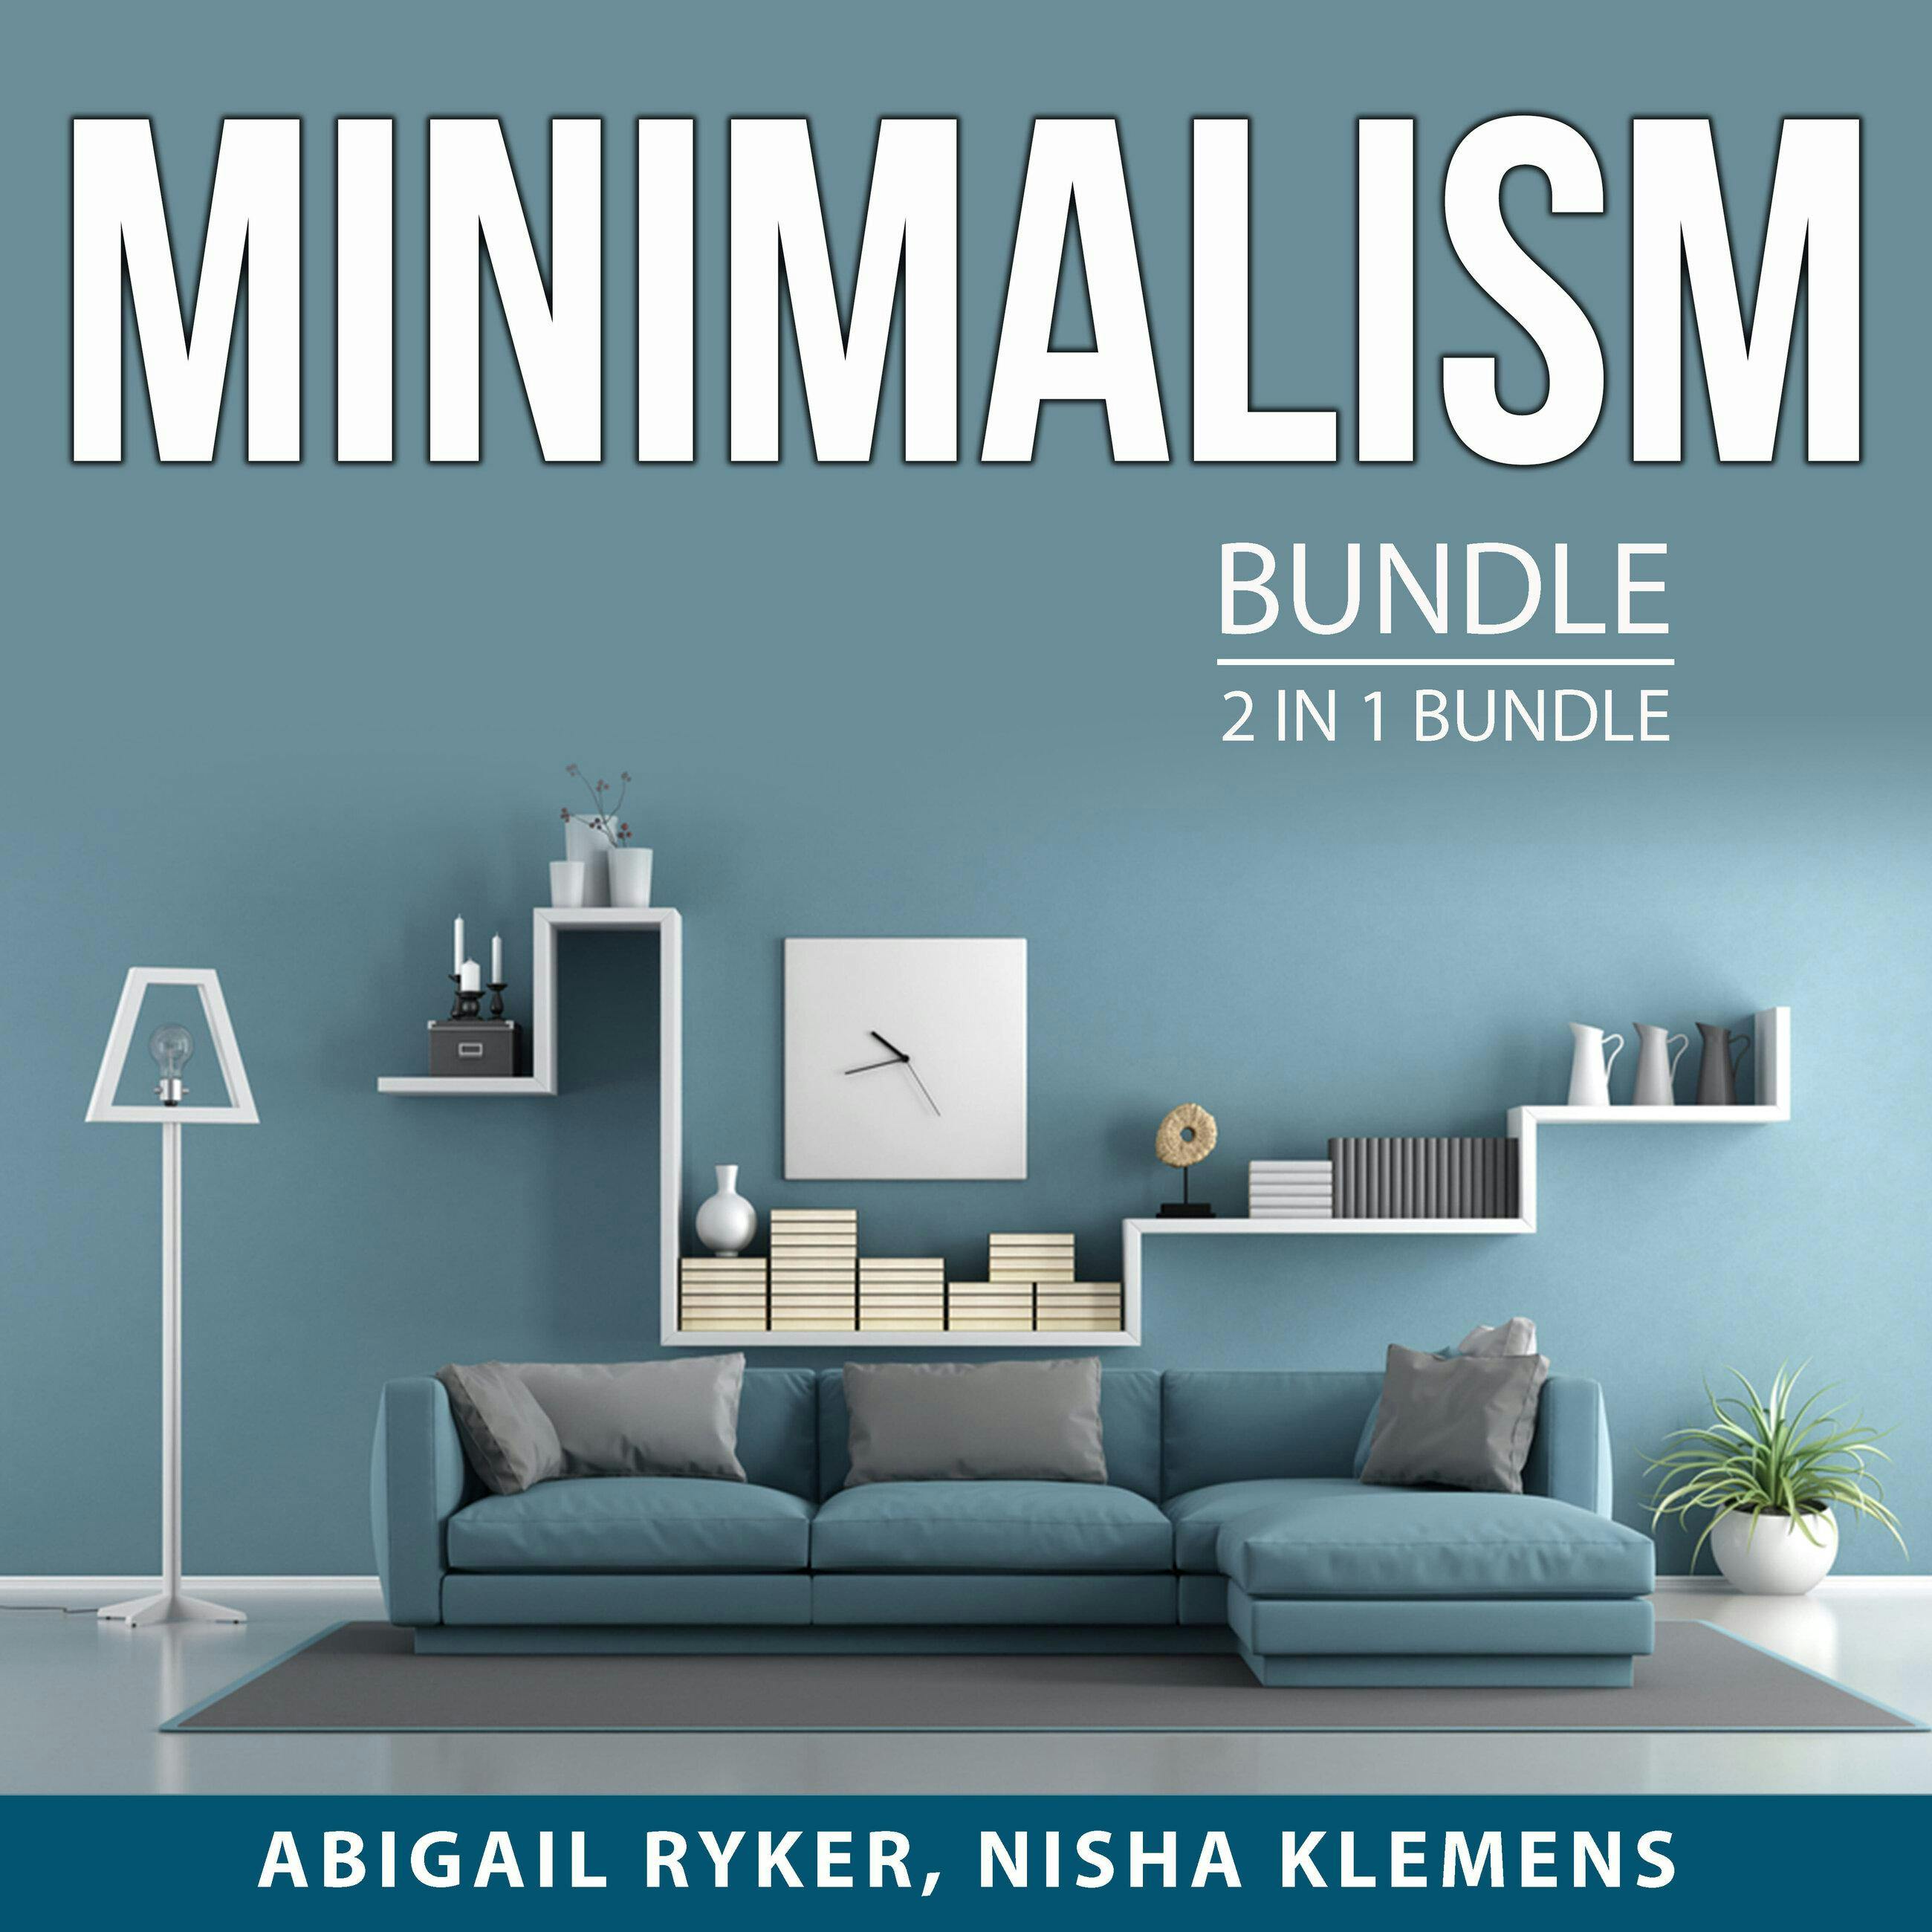 Minimalism Bundle, 2 in 1 Bundle: Declutter Your Life and Minimalist Life - undefined